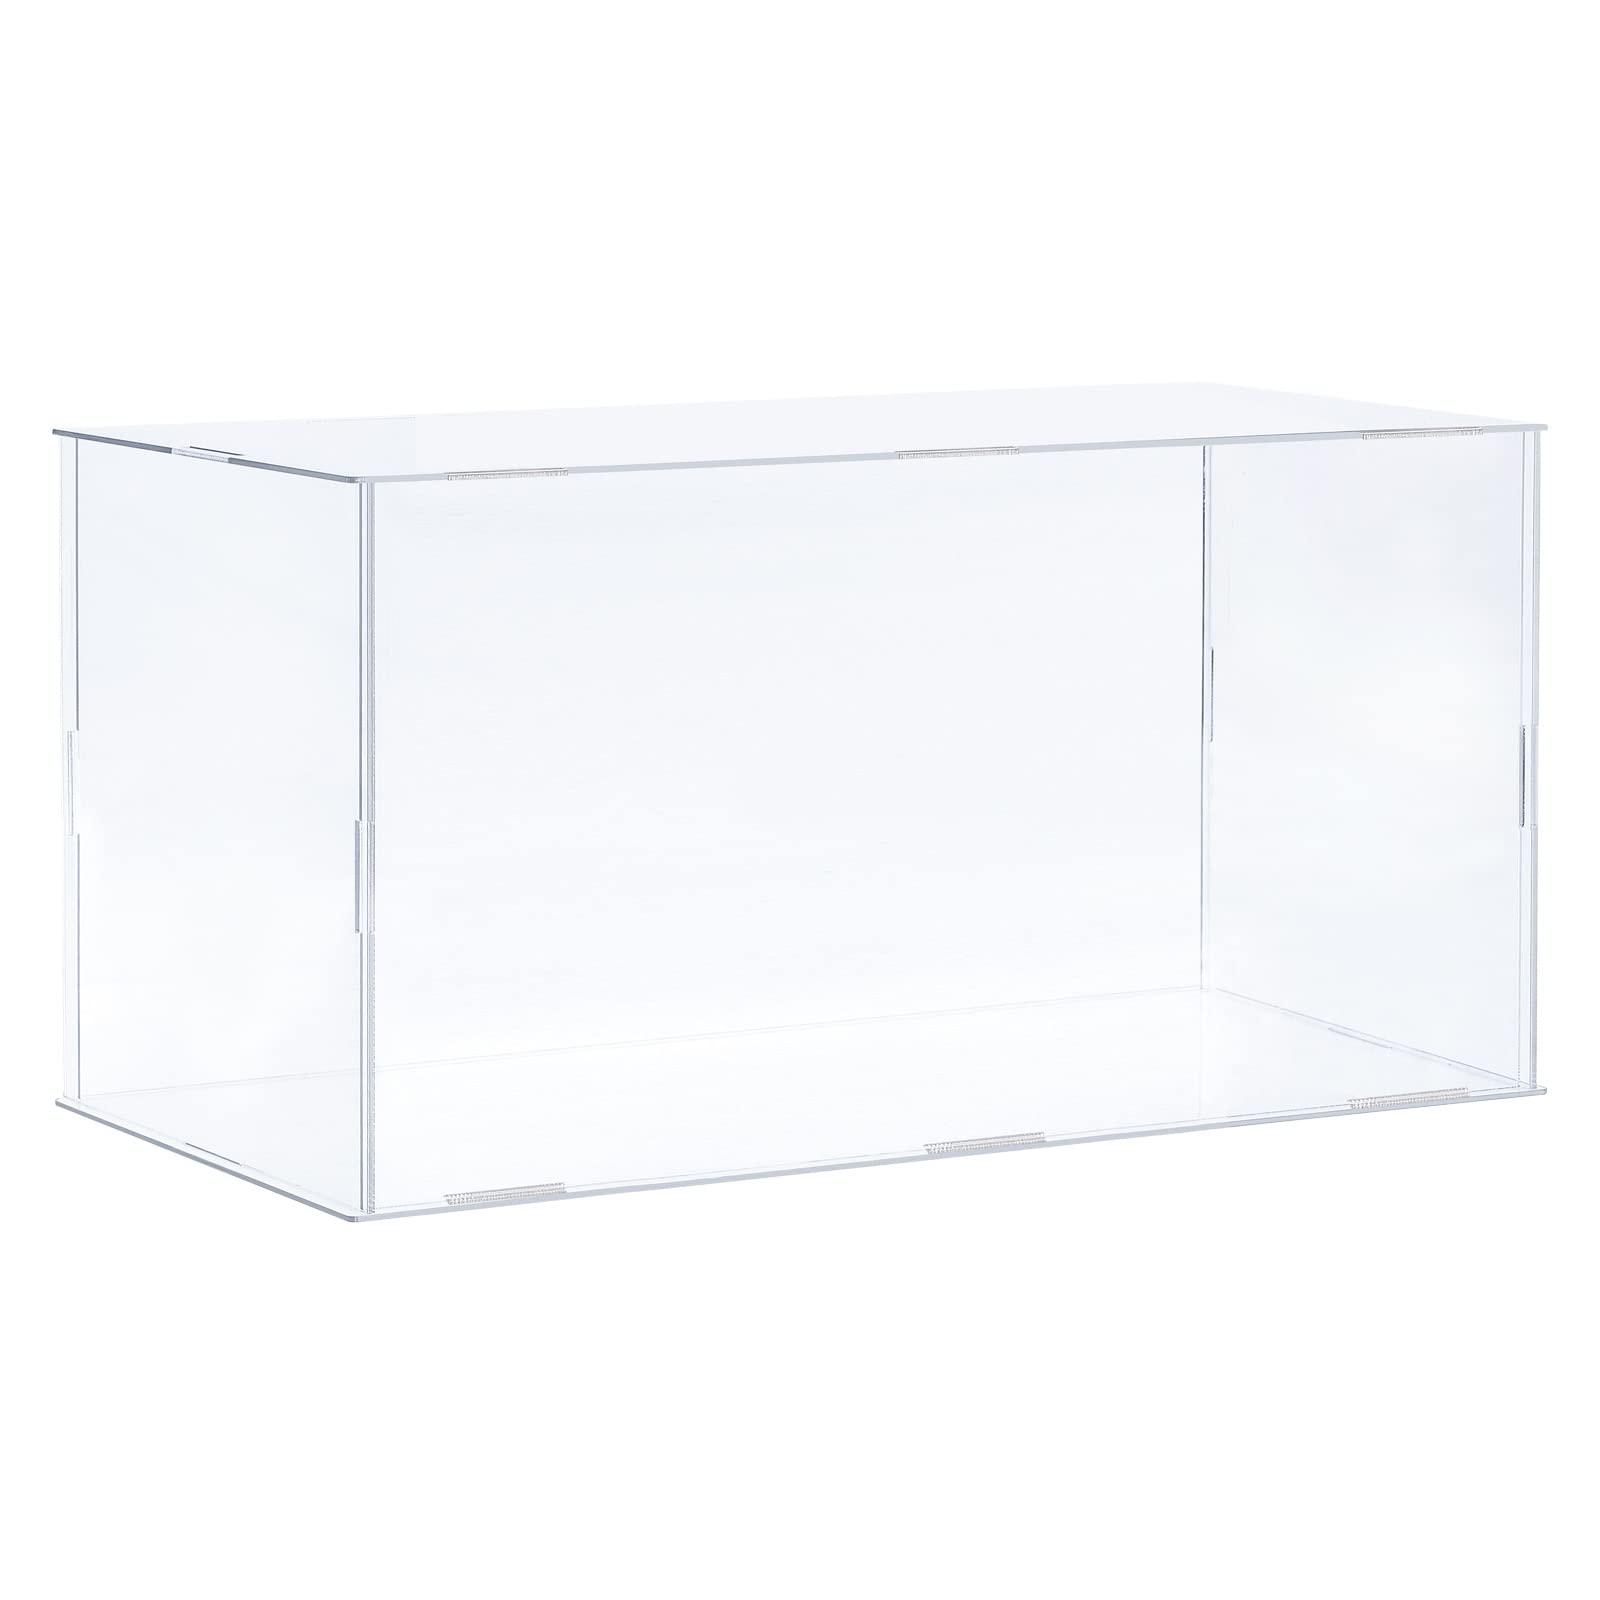 sourcing map Acrylic Display Case Plastic Box Clear Assemble Dustproof Showcase 31x16x15.5cm for Collectibles Items 0